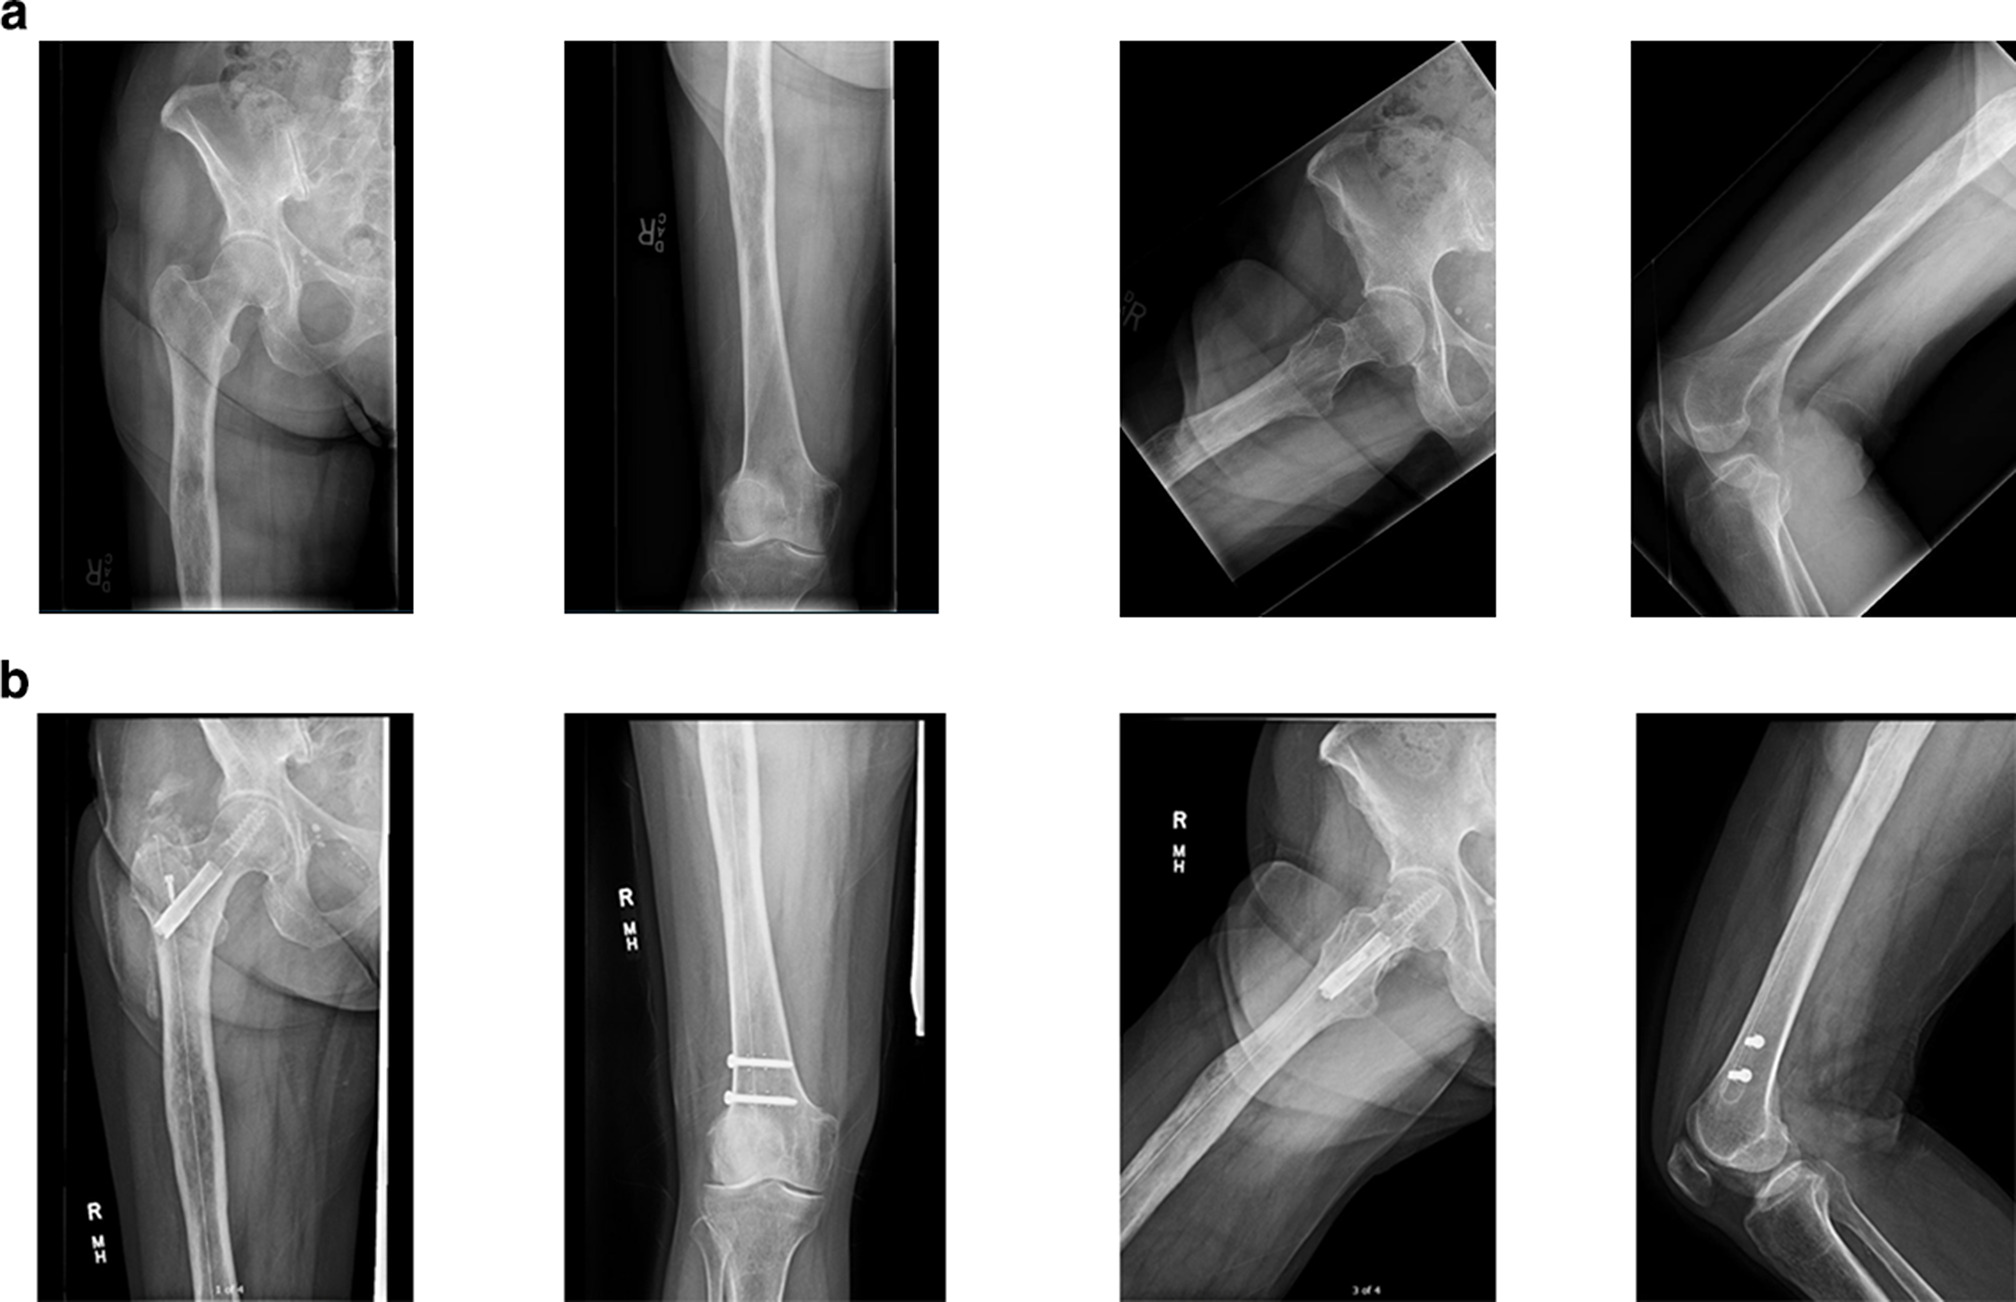 Fig. 3 
          a) Anteroposterior (AP) and lateral radiographs of the right femur of a 74-year-old female with a breast adenocarcinoma metastatic lesion noted in the proximal femur. b) AP and lateral radiographs of the right femur four months after placement of a prophylactic carbon fibre intramedullary nail. The proximal femoral lesion is visible given the radiolucency of the nail. This patient received post-surgical radiation.
        